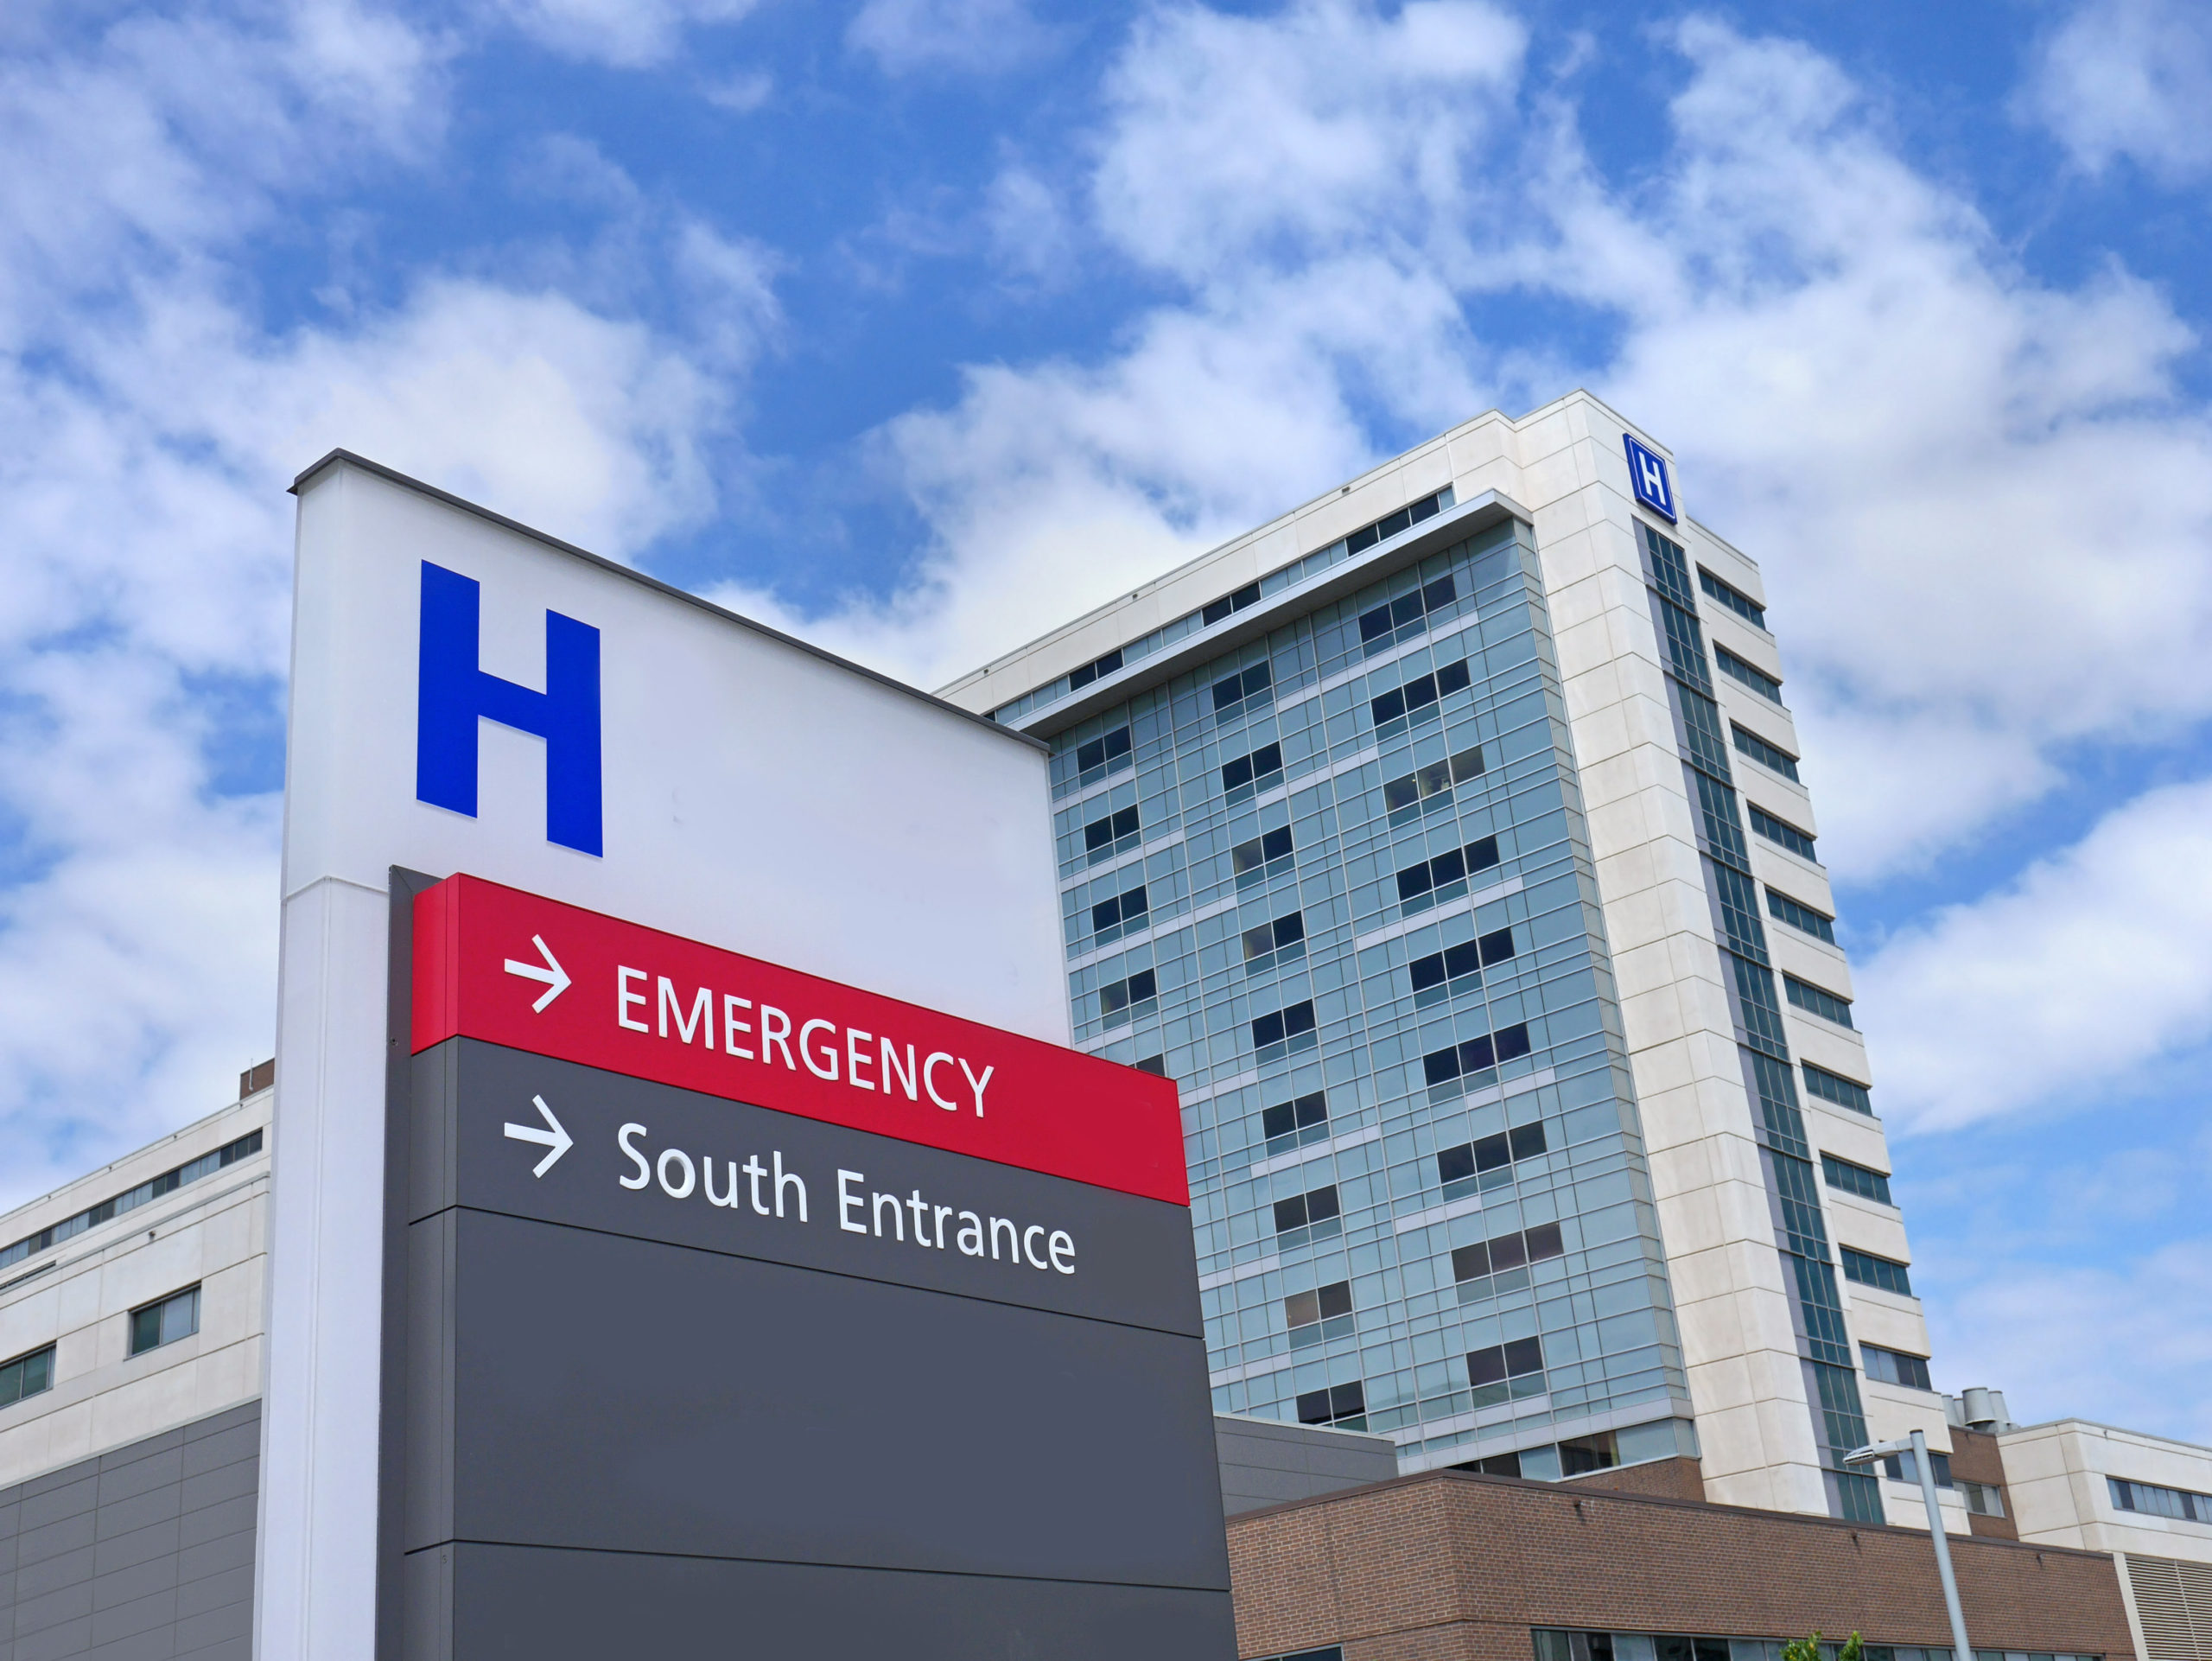 Direction Sign With Capital Letter H For Hospital